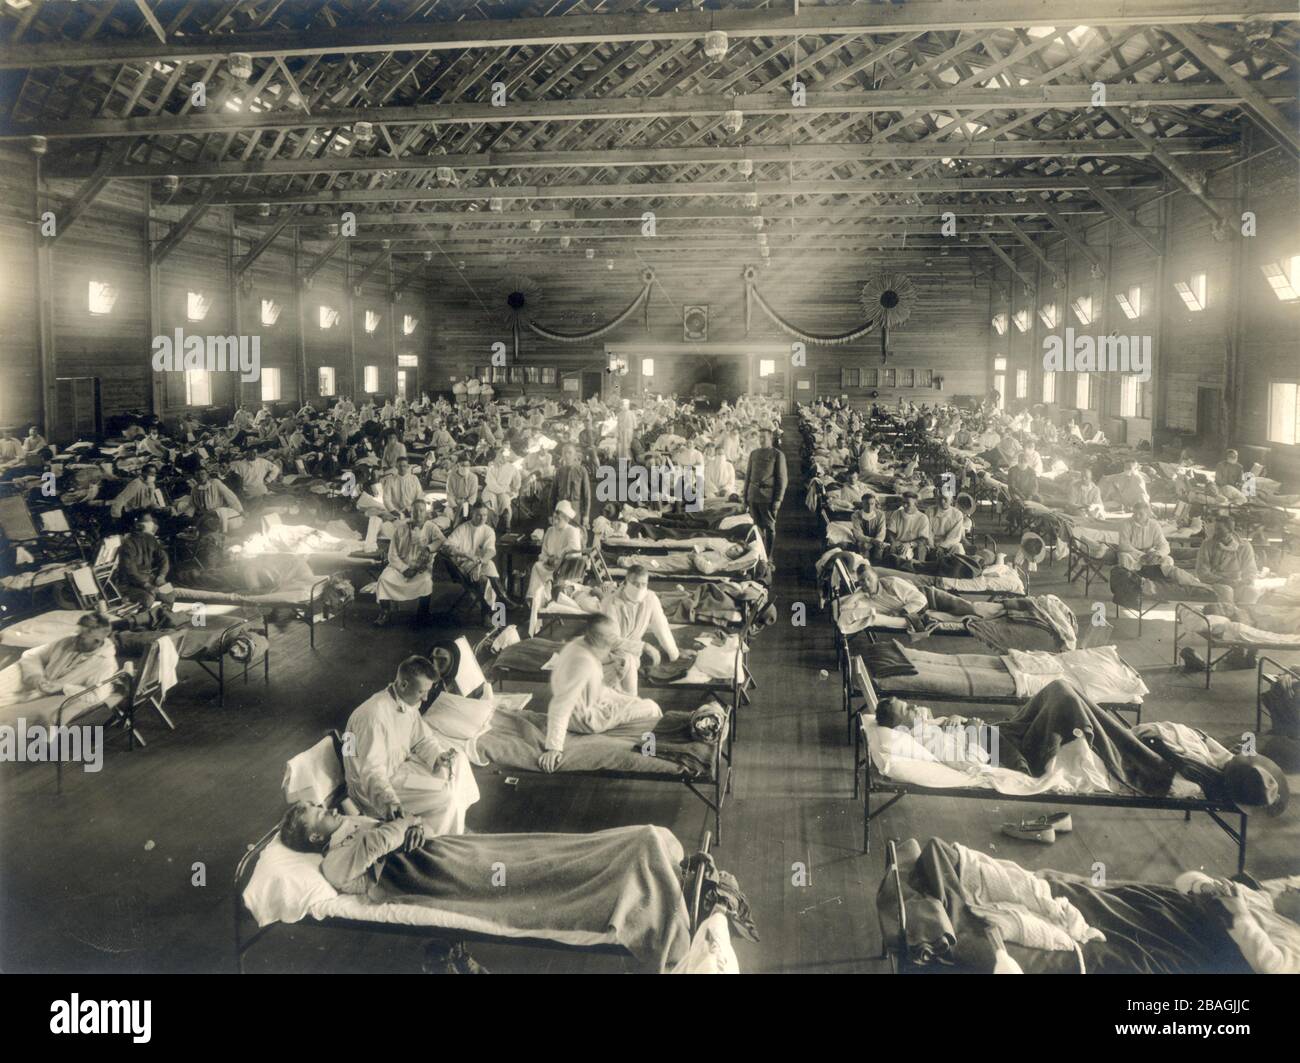 Spanish Flu. Soldiers from Fort Riley, Kansas, ill with Spanish flu at a hospital ward at Camp Funston Emergency hospital during influenza epidemic, Camp Funston, Kansas. 1918 Stock Photo